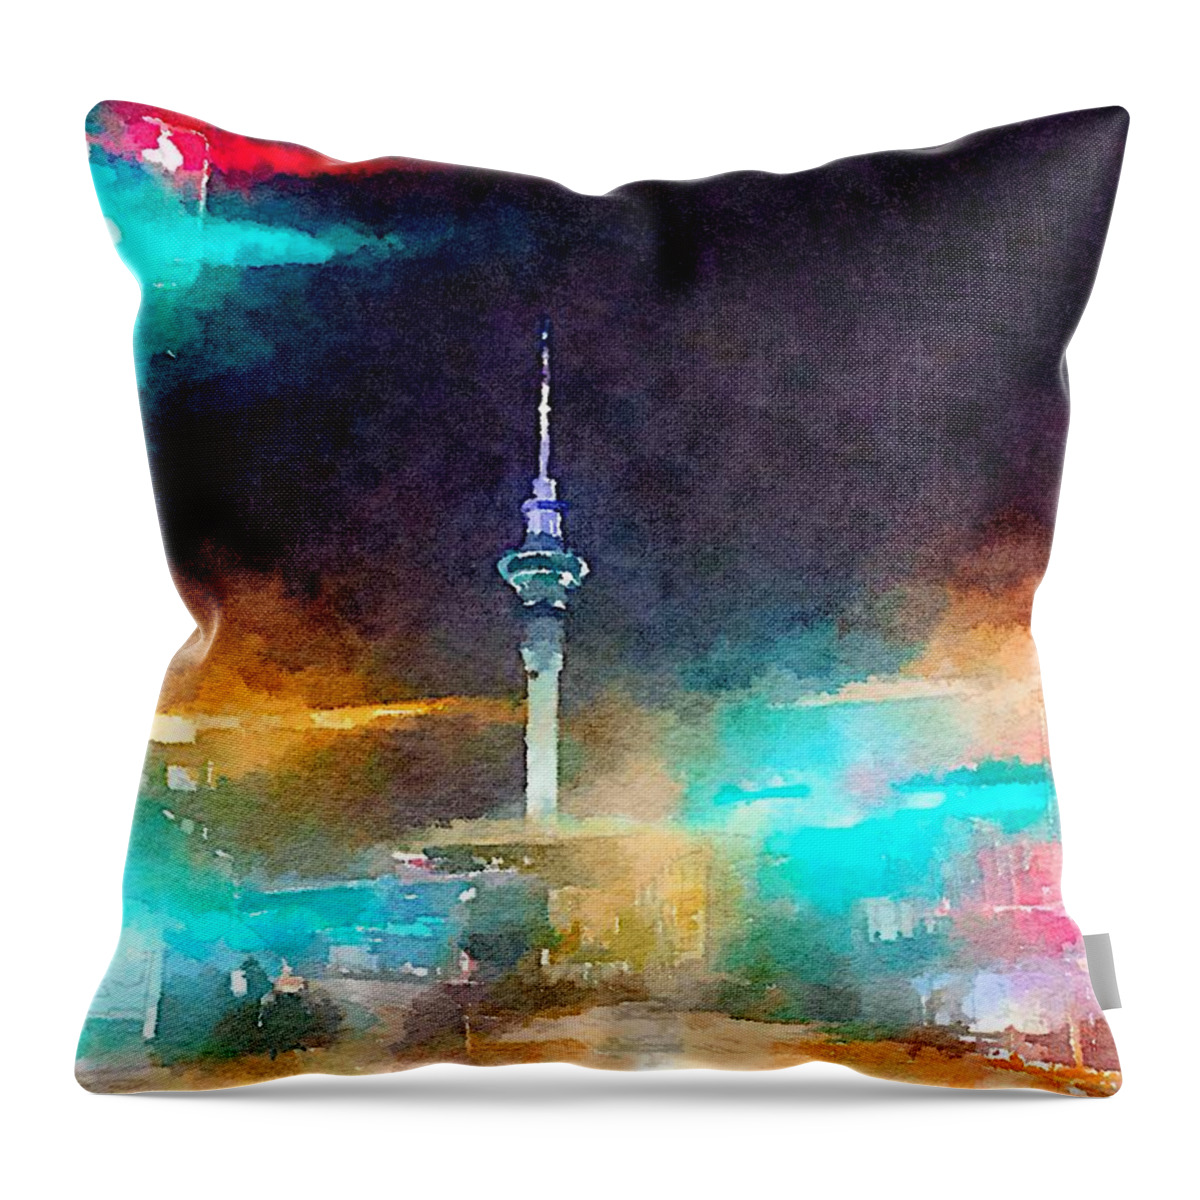 Sky Tower Throw Pillow featuring the painting Sky Tower by night by HELGE Art Gallery